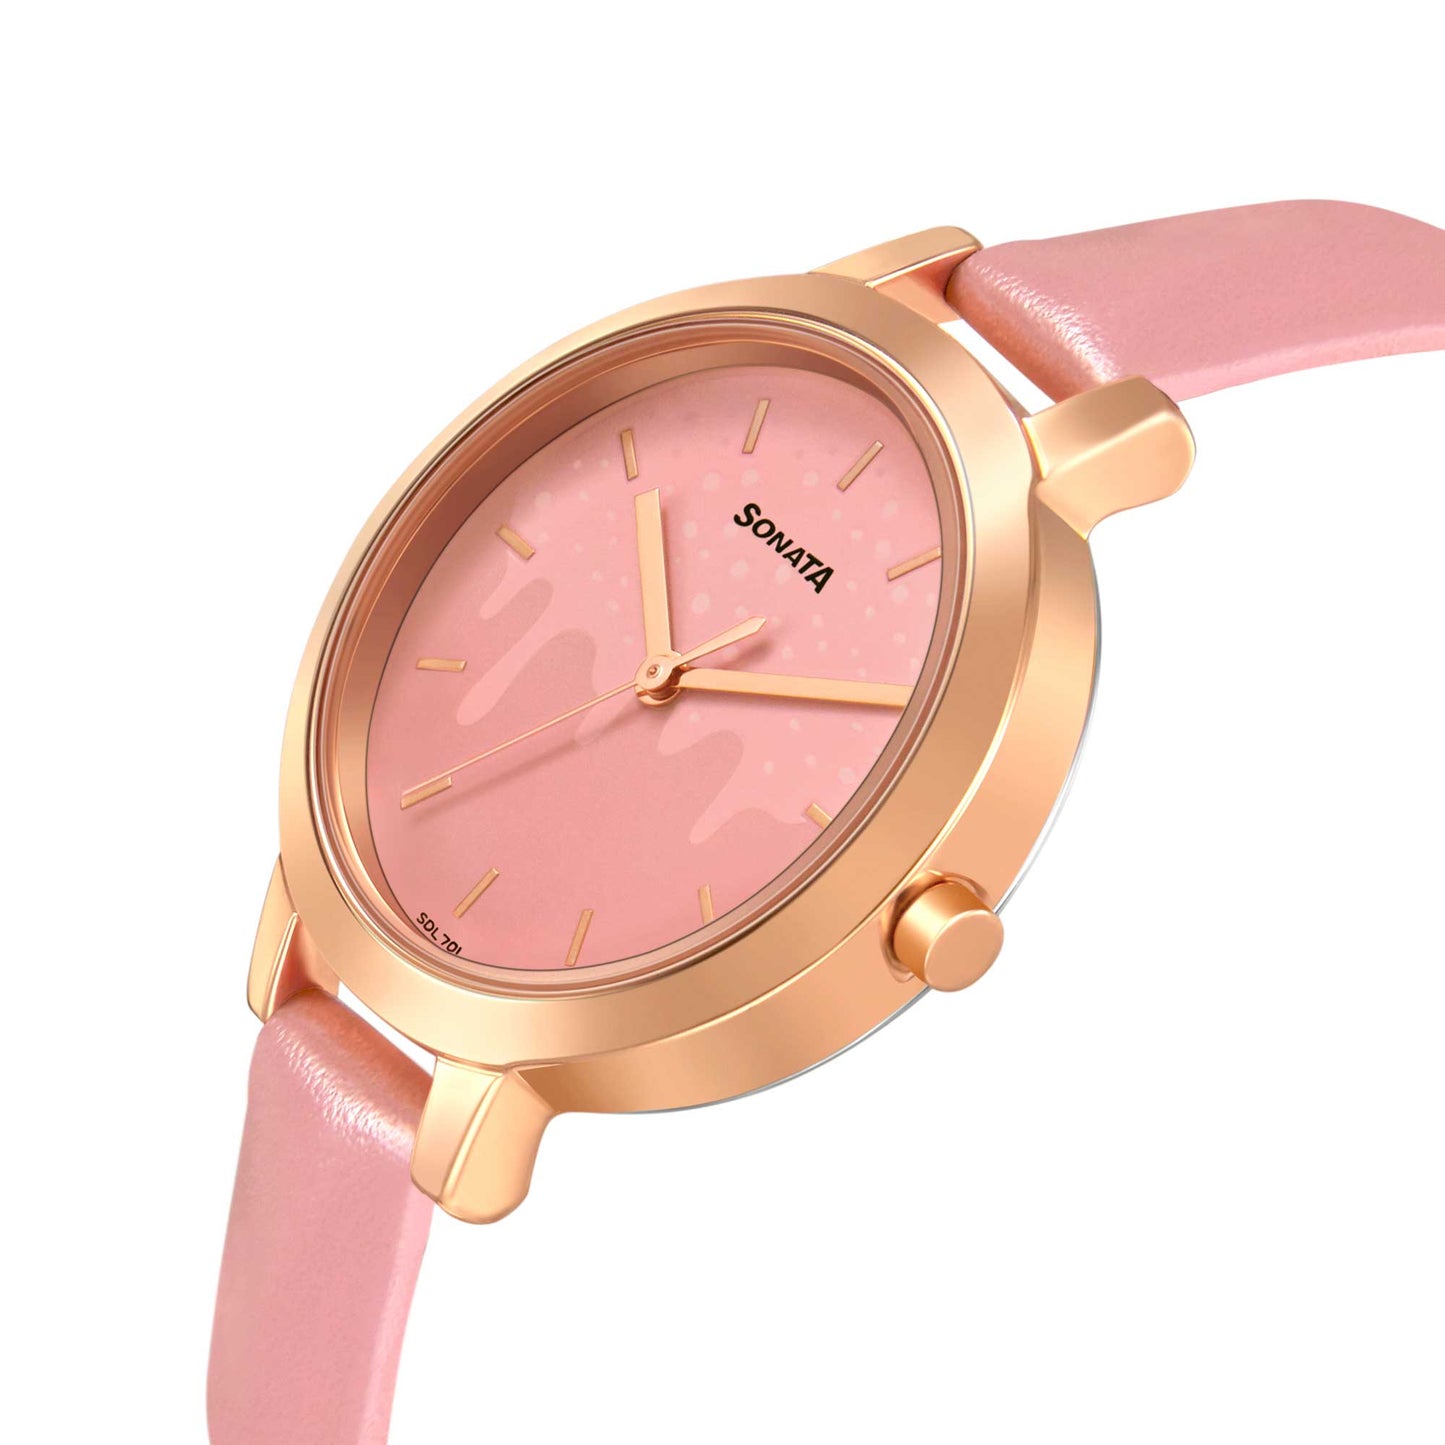 Sonata Play Pink Dial Women Watch With Leather Strap